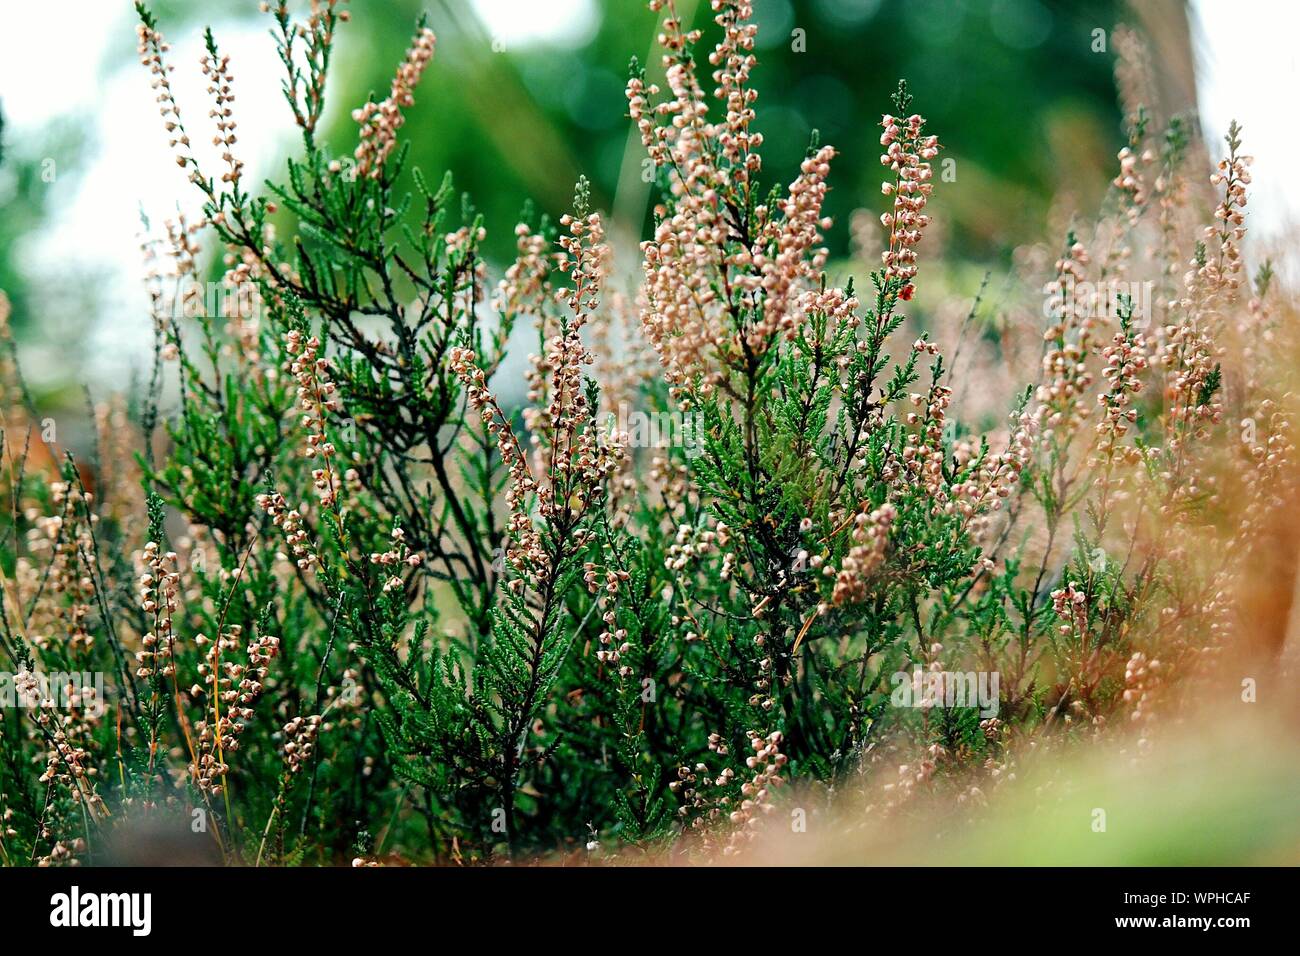 Heather Flowers Blooming Outdoors Stock Photo